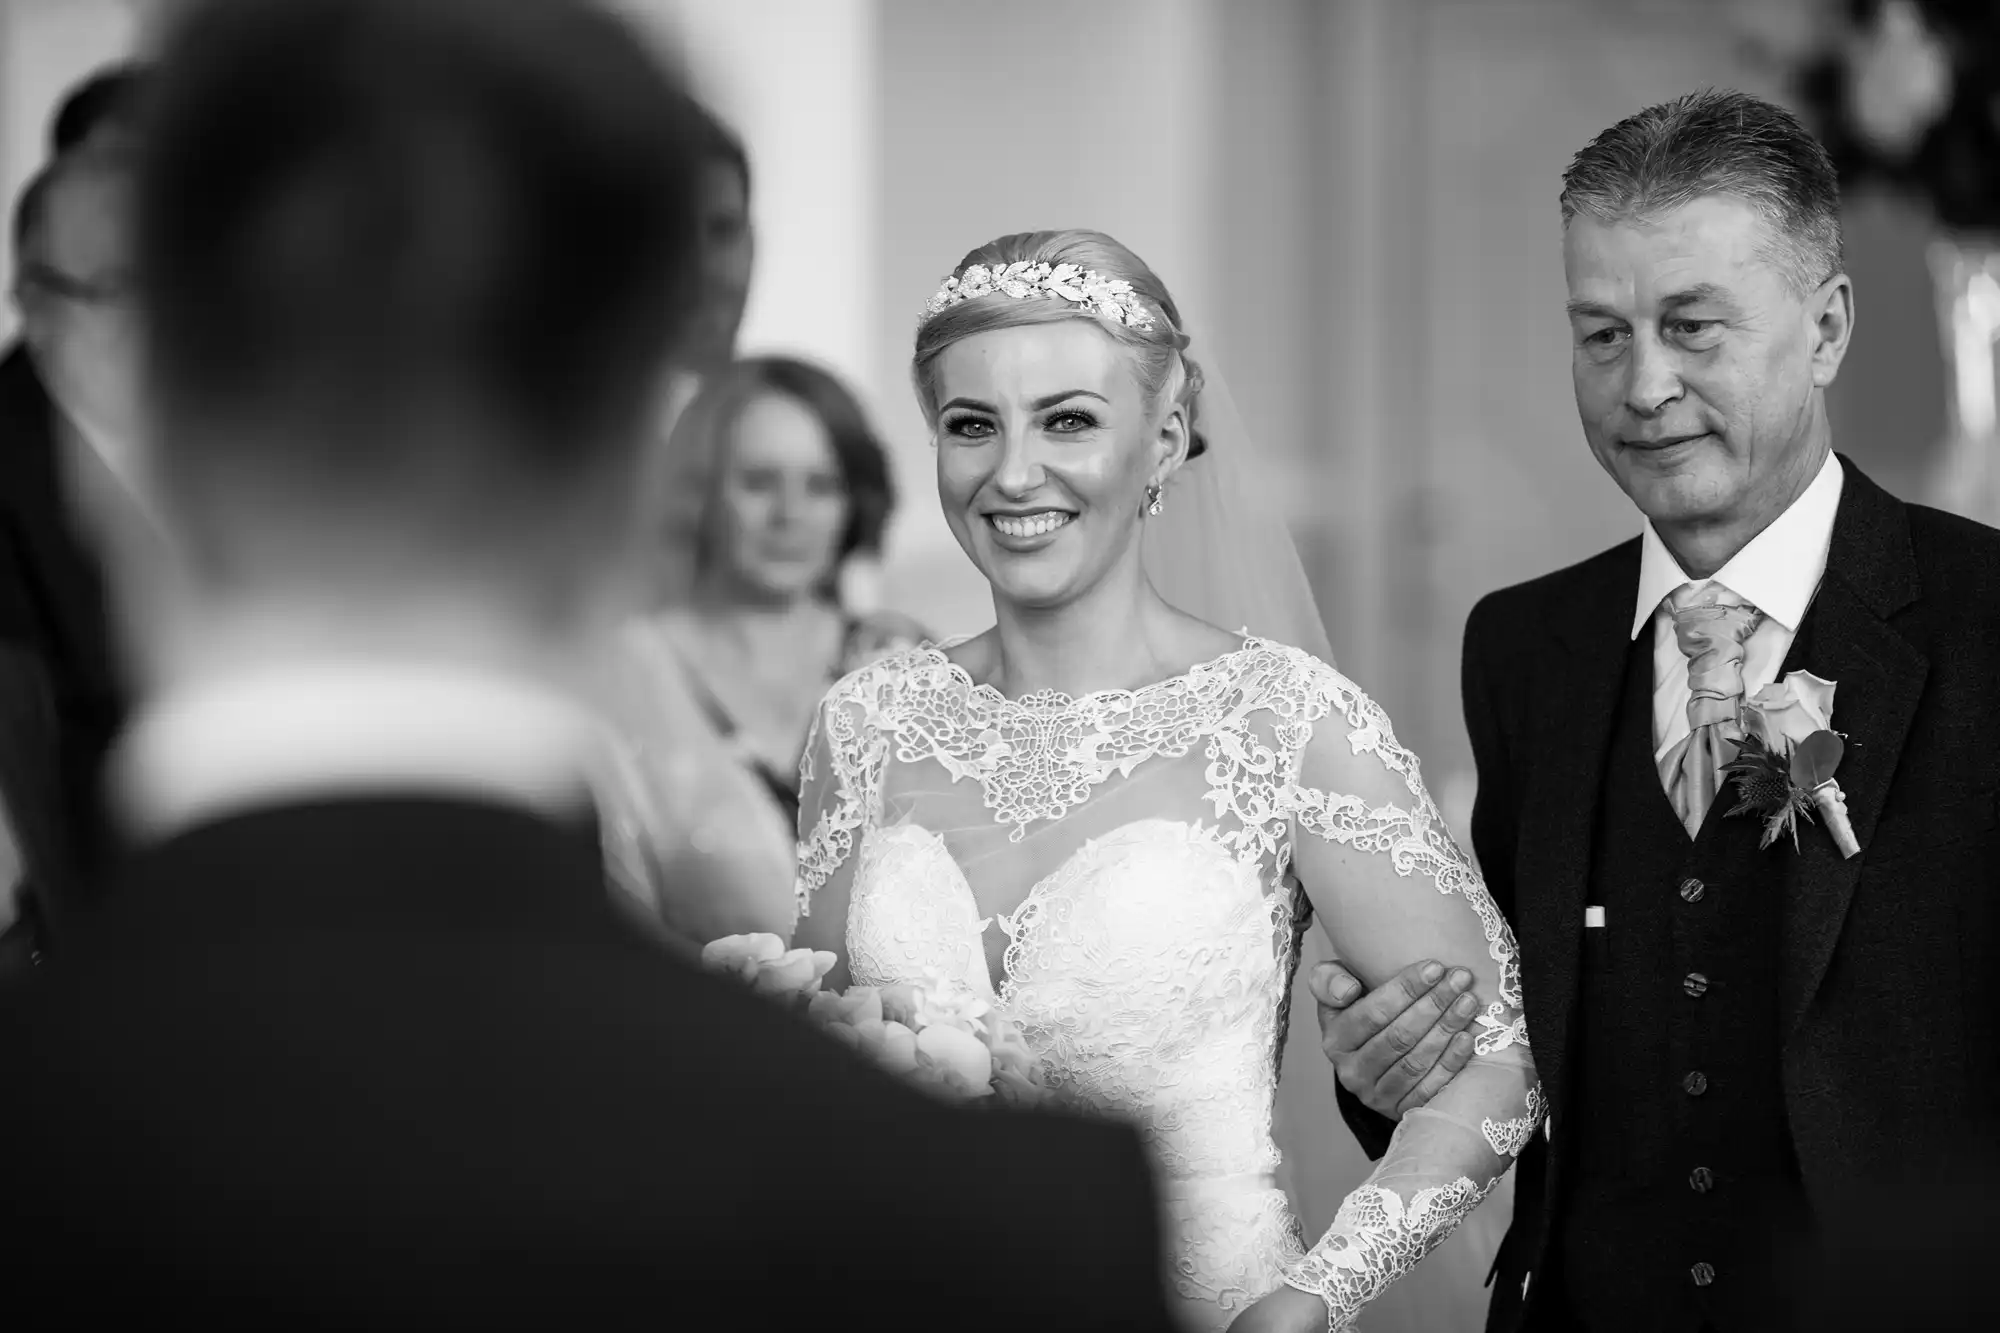 A bride in a lace wedding dress walks down the aisle with her father, smiling at her groom in the foreground. Black and white photo.